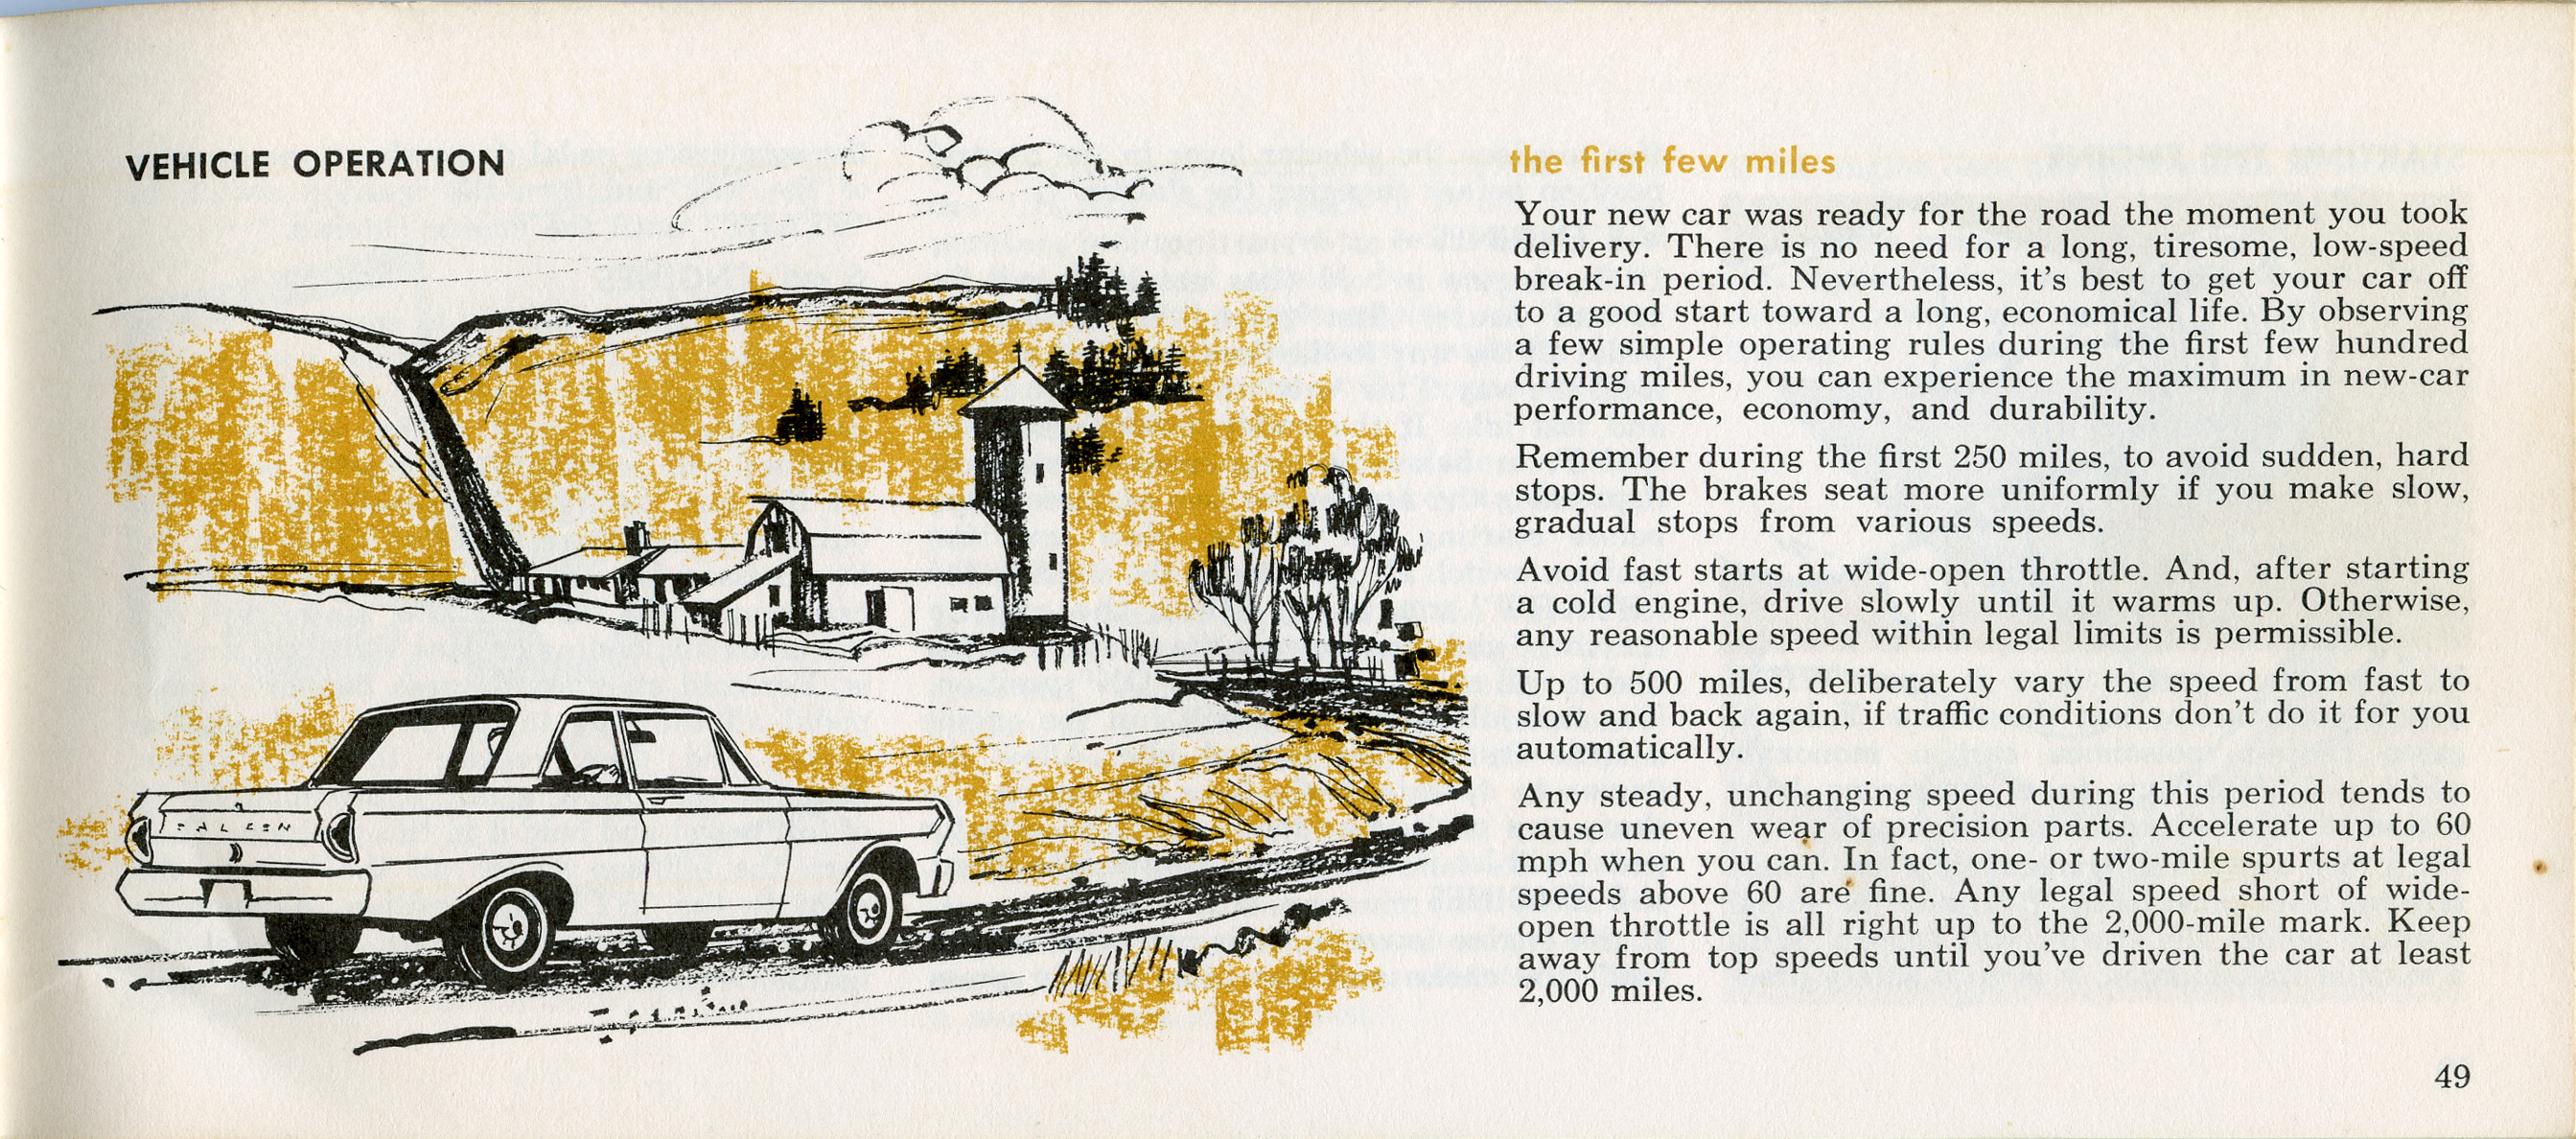 1964 Ford Falcon Owners Manual-49